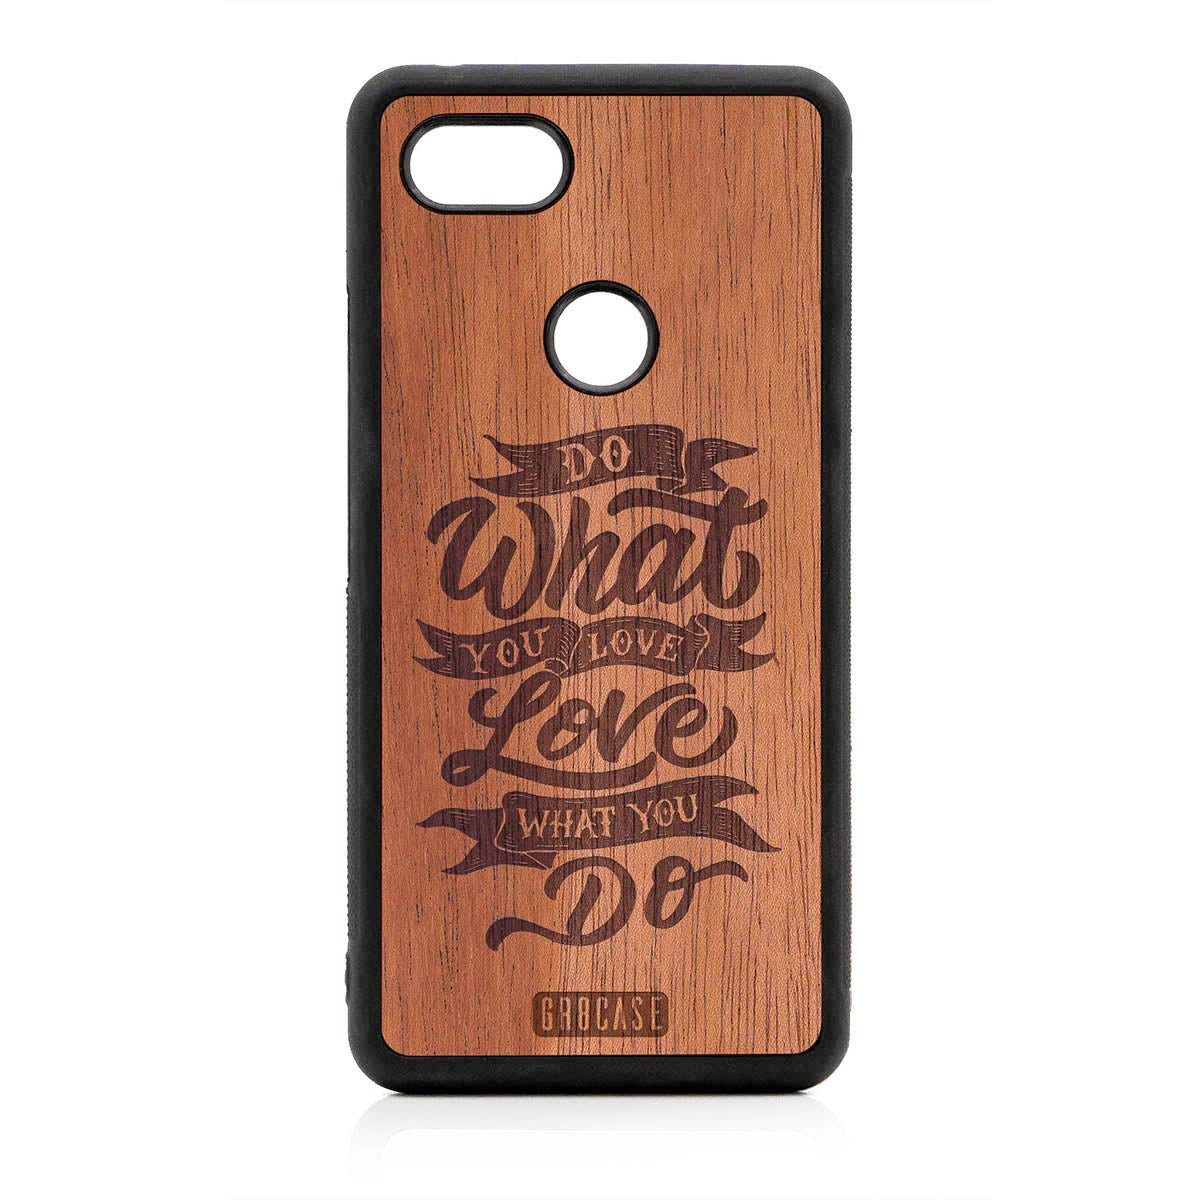 Do What You Love Love What You Do Design Wood Case For Google Pixel 3 XL by GR8CASE